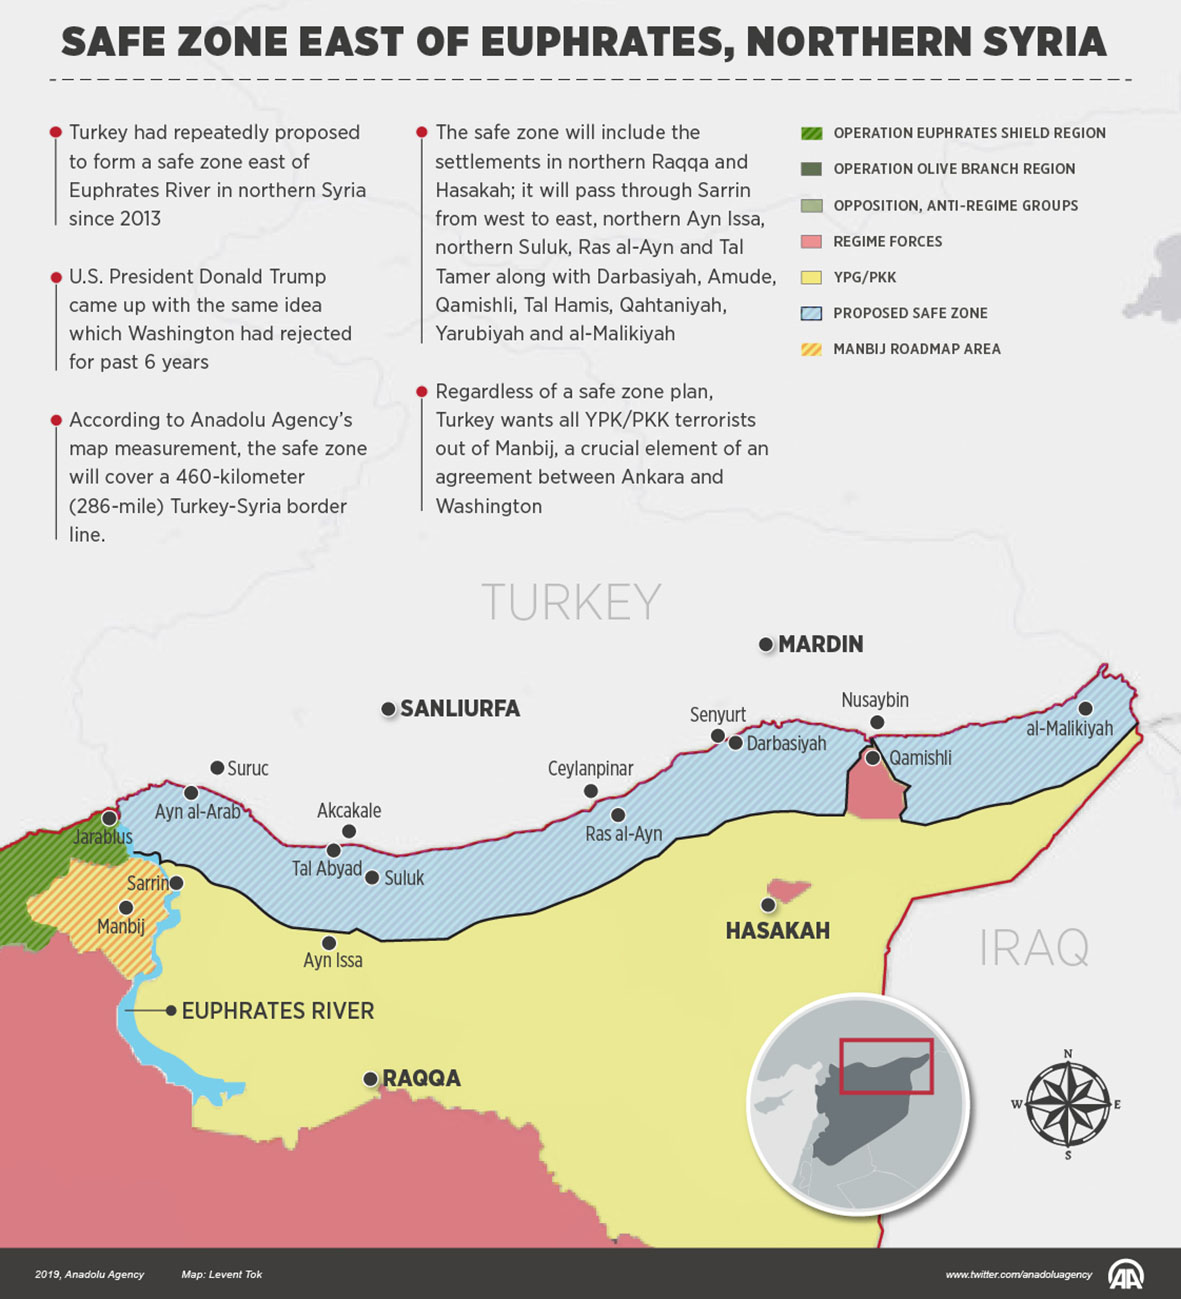 An infographic released by Turkey’s Anadolu Agency on 16 January shows the proposed ‘safe zone’ in northeast Syria. (Anadolu Agency)